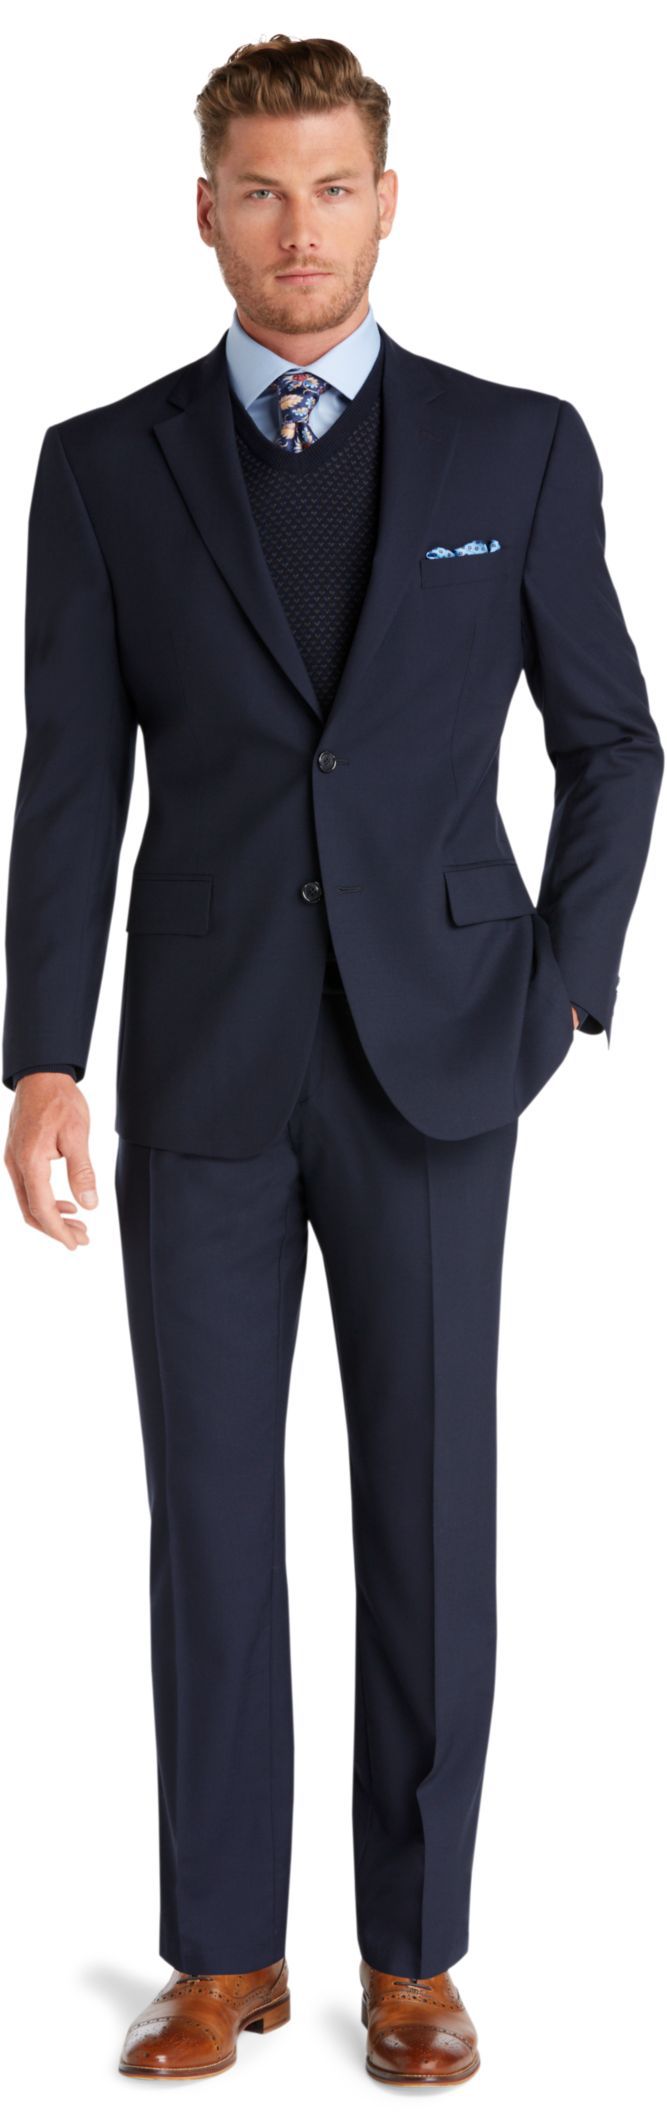 Executive Collection Traditional Fit Suit - Big & Tall - Big & Tall